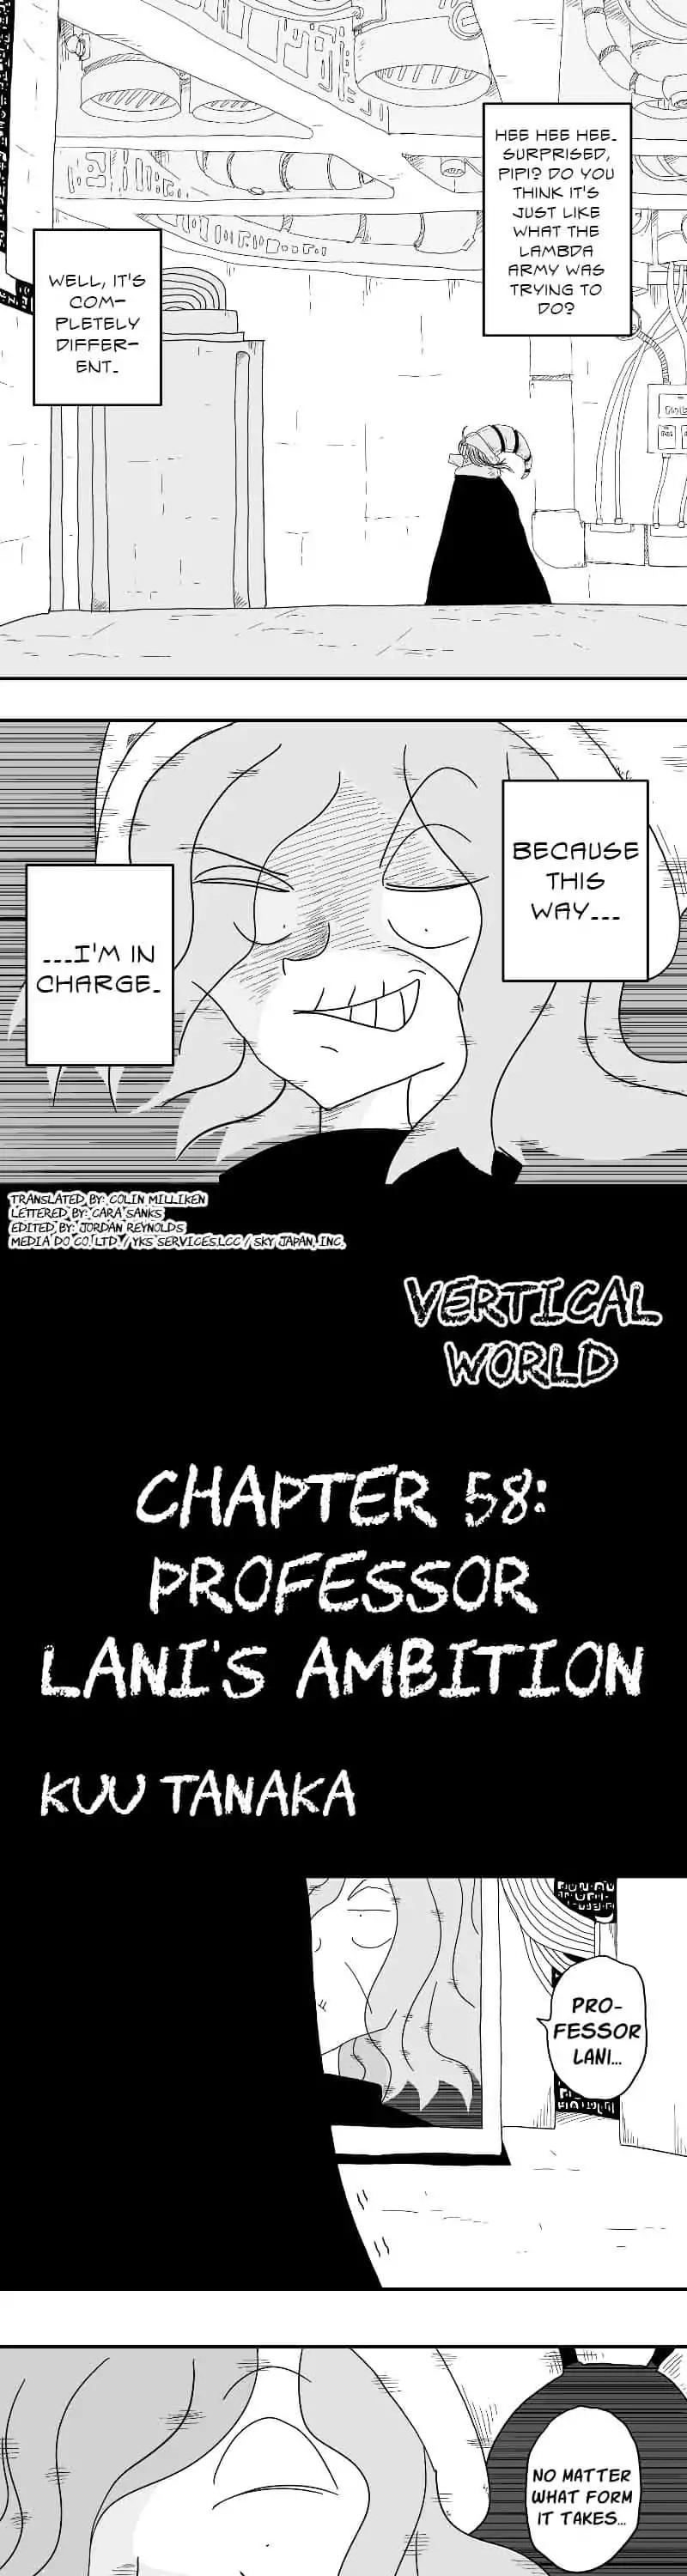 The Vertical Country Chapter 58: